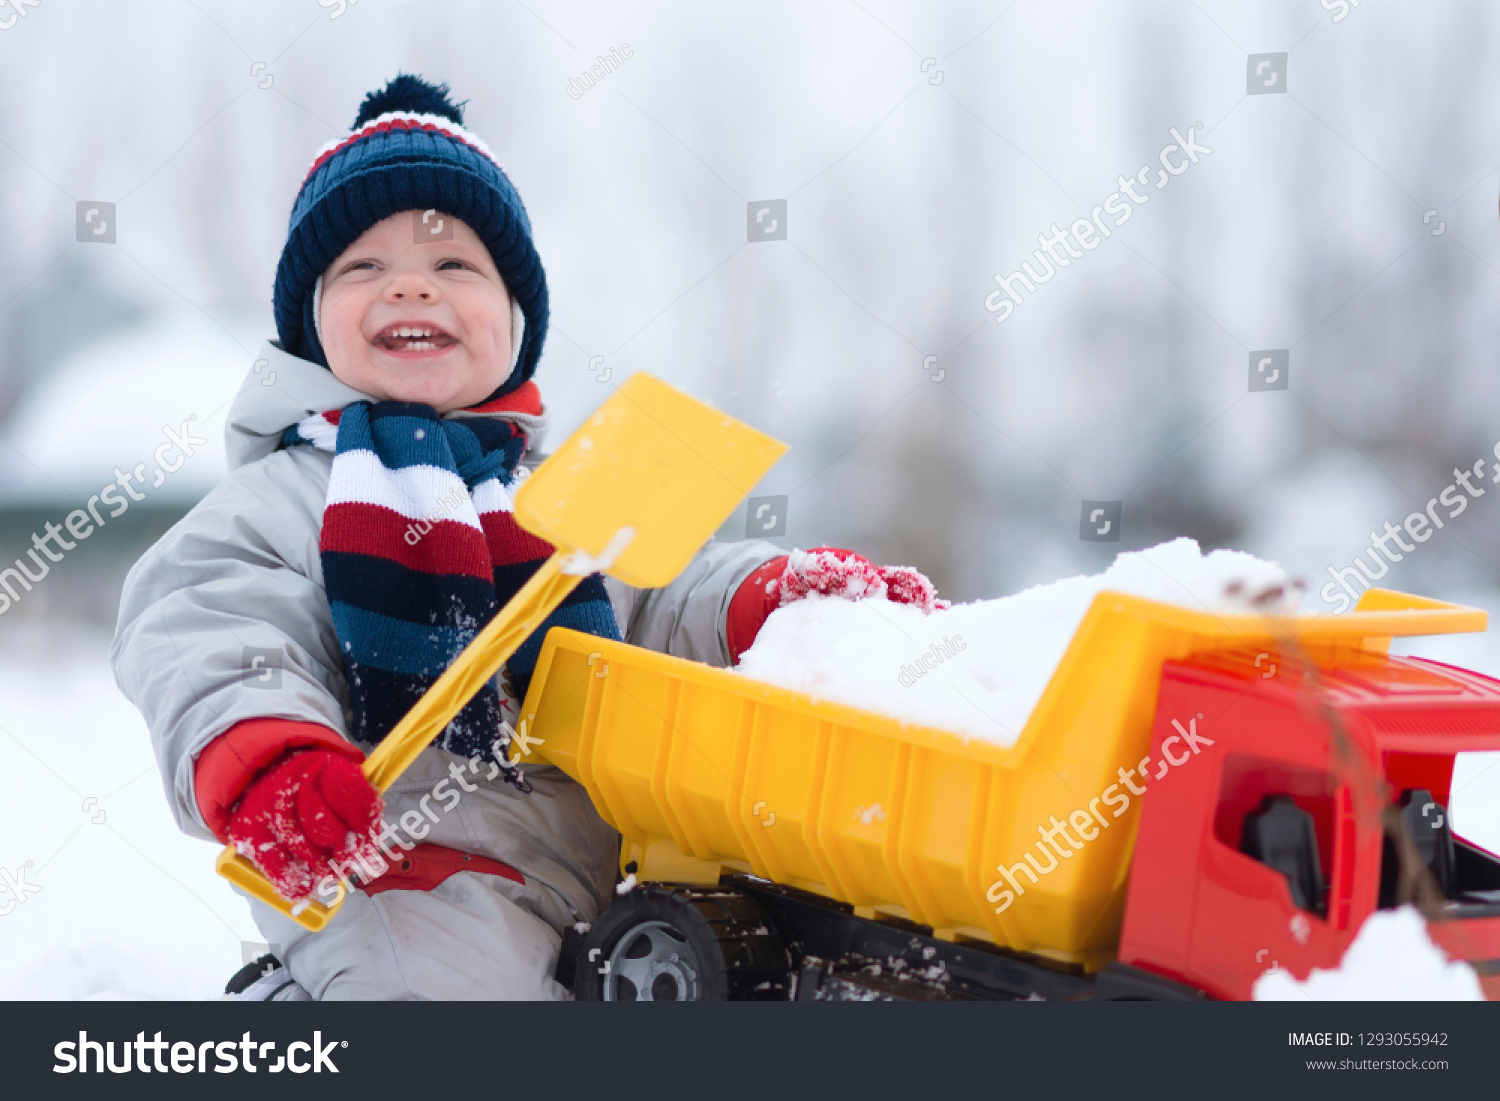 little baby boy playing with his favourite toy at the snowtime. A kid 15-23 month enjoy playfull,spending time in snow. A toddler  and his plastic truck at the winter games. Kids and toys concept #1293055942